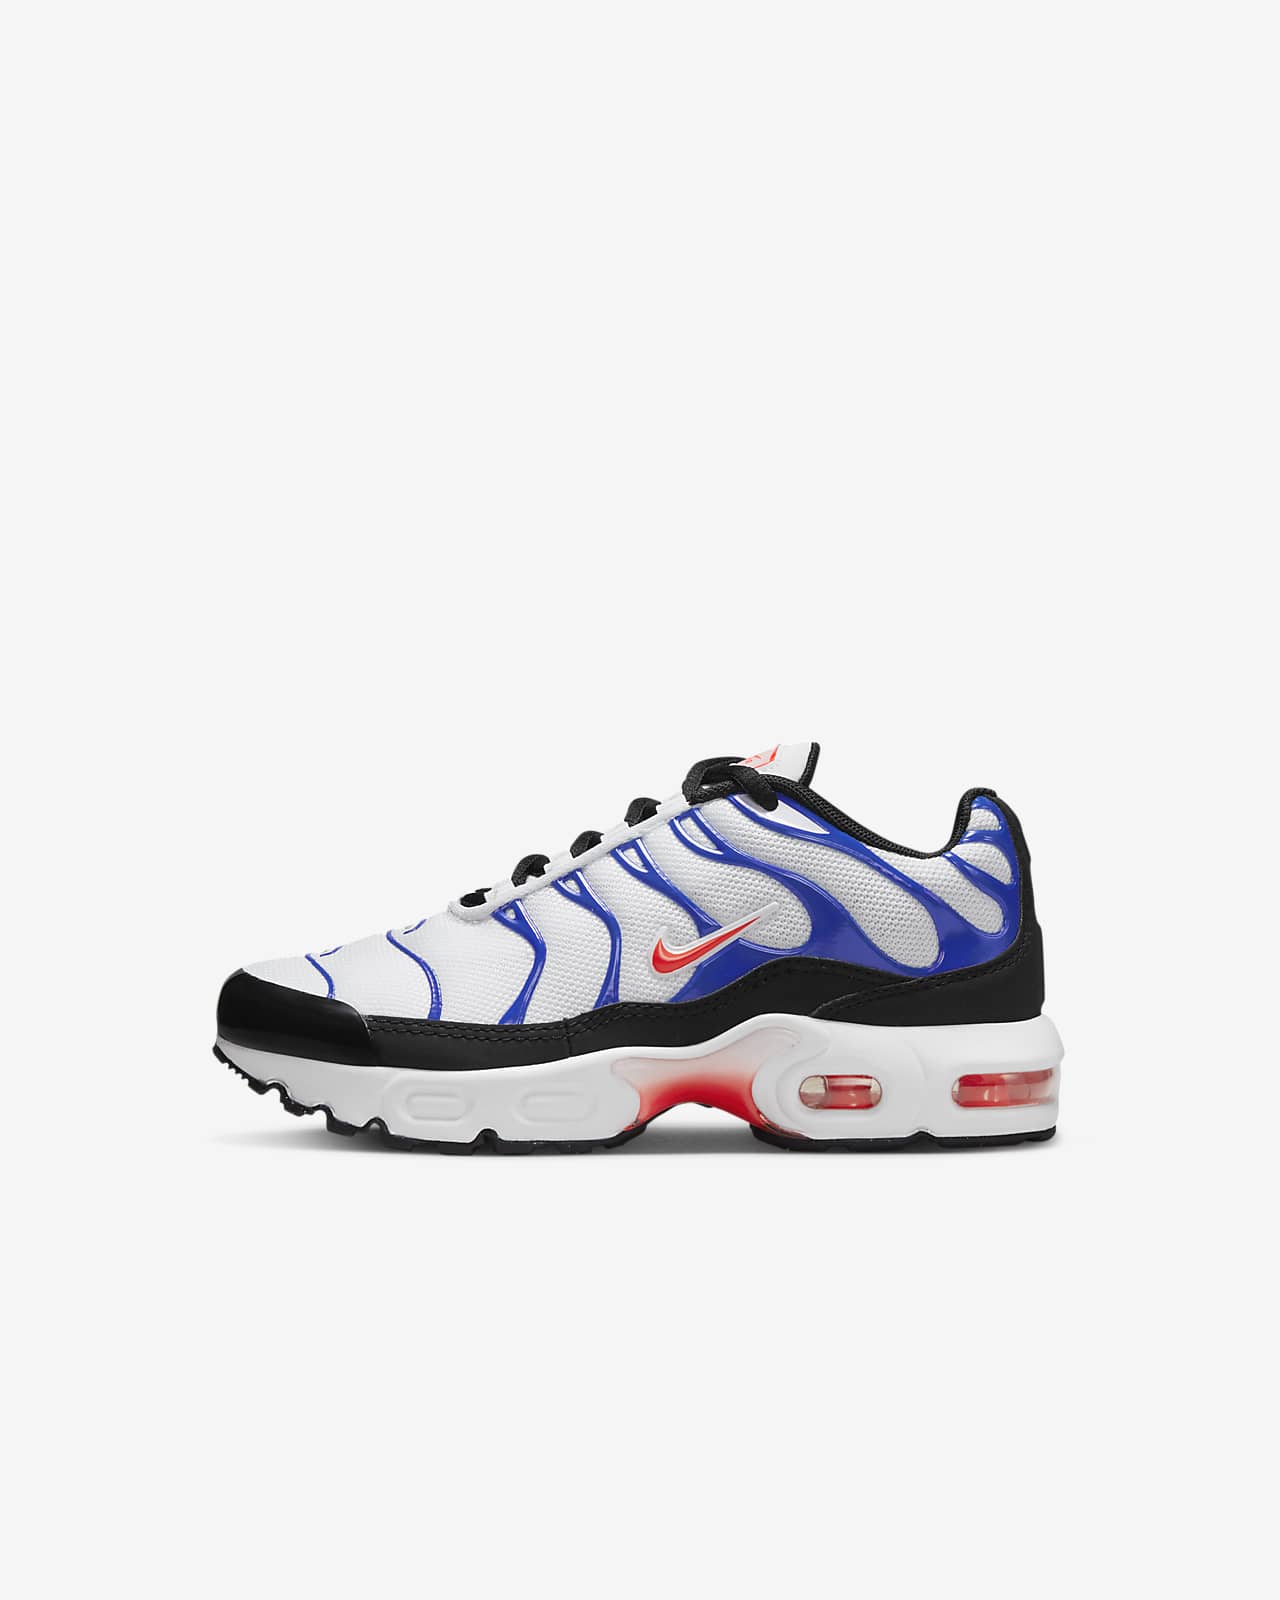 tapijt hotel Attent Nike Air Max Plus Younger Kids' Shoes. Nike LU